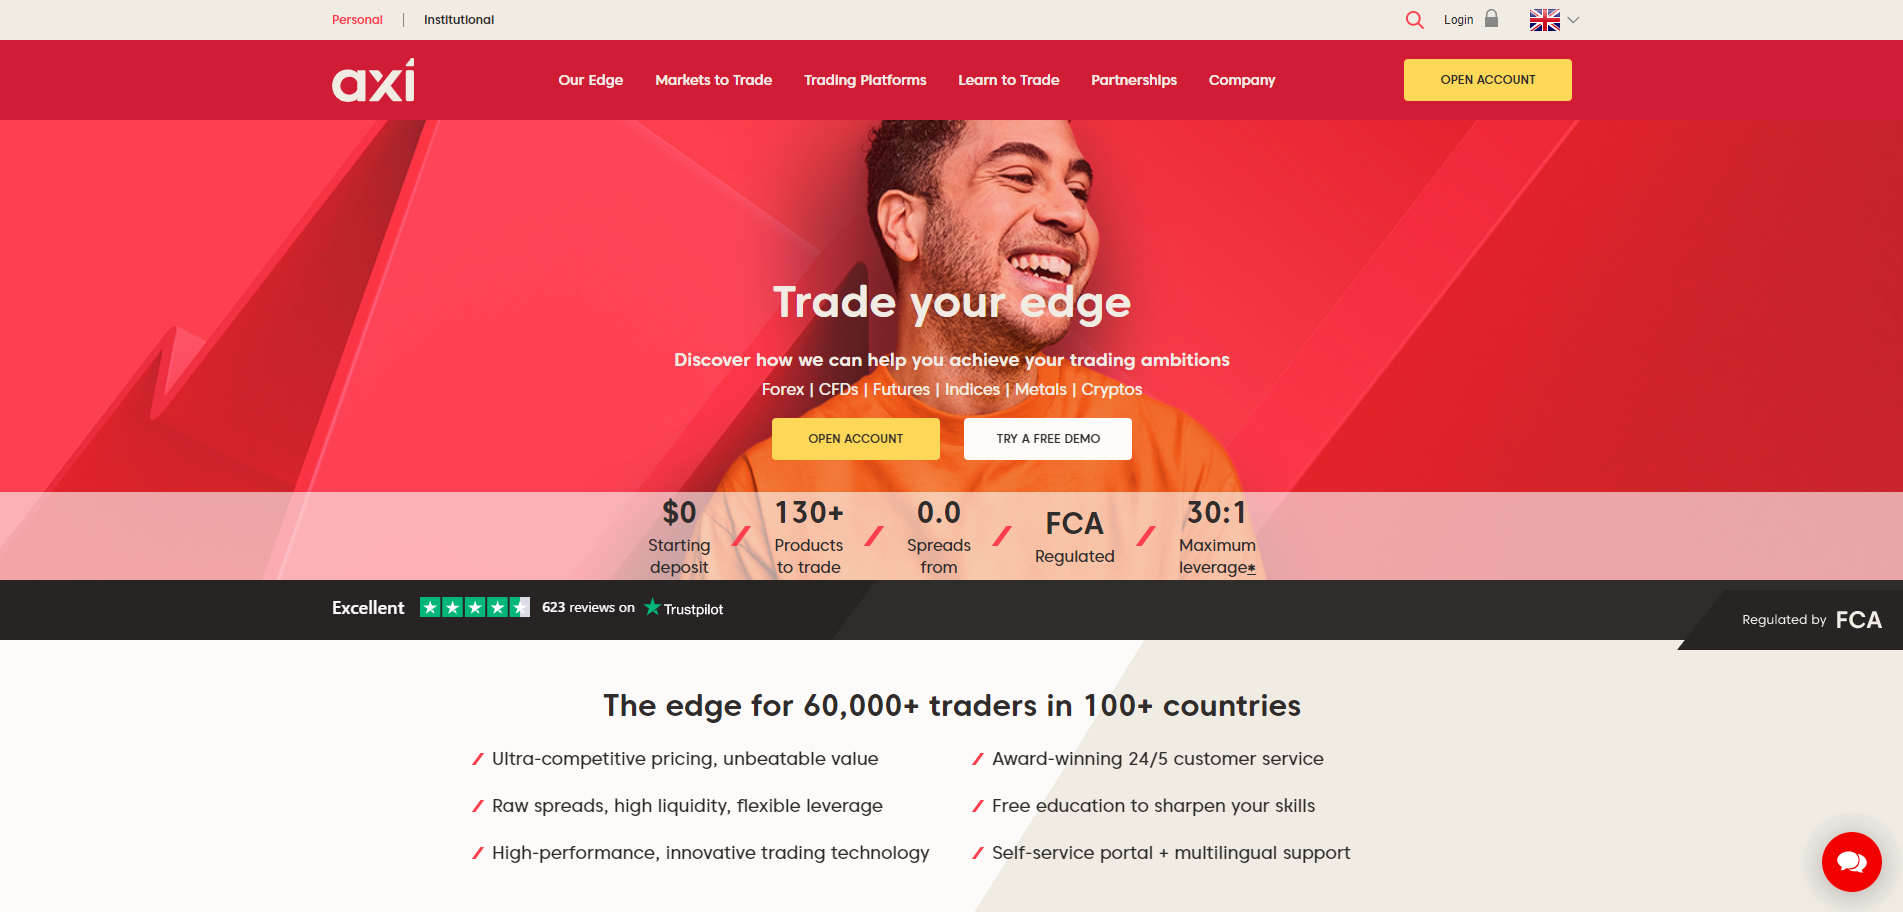 The official website of the Forex Broker AxiTrader